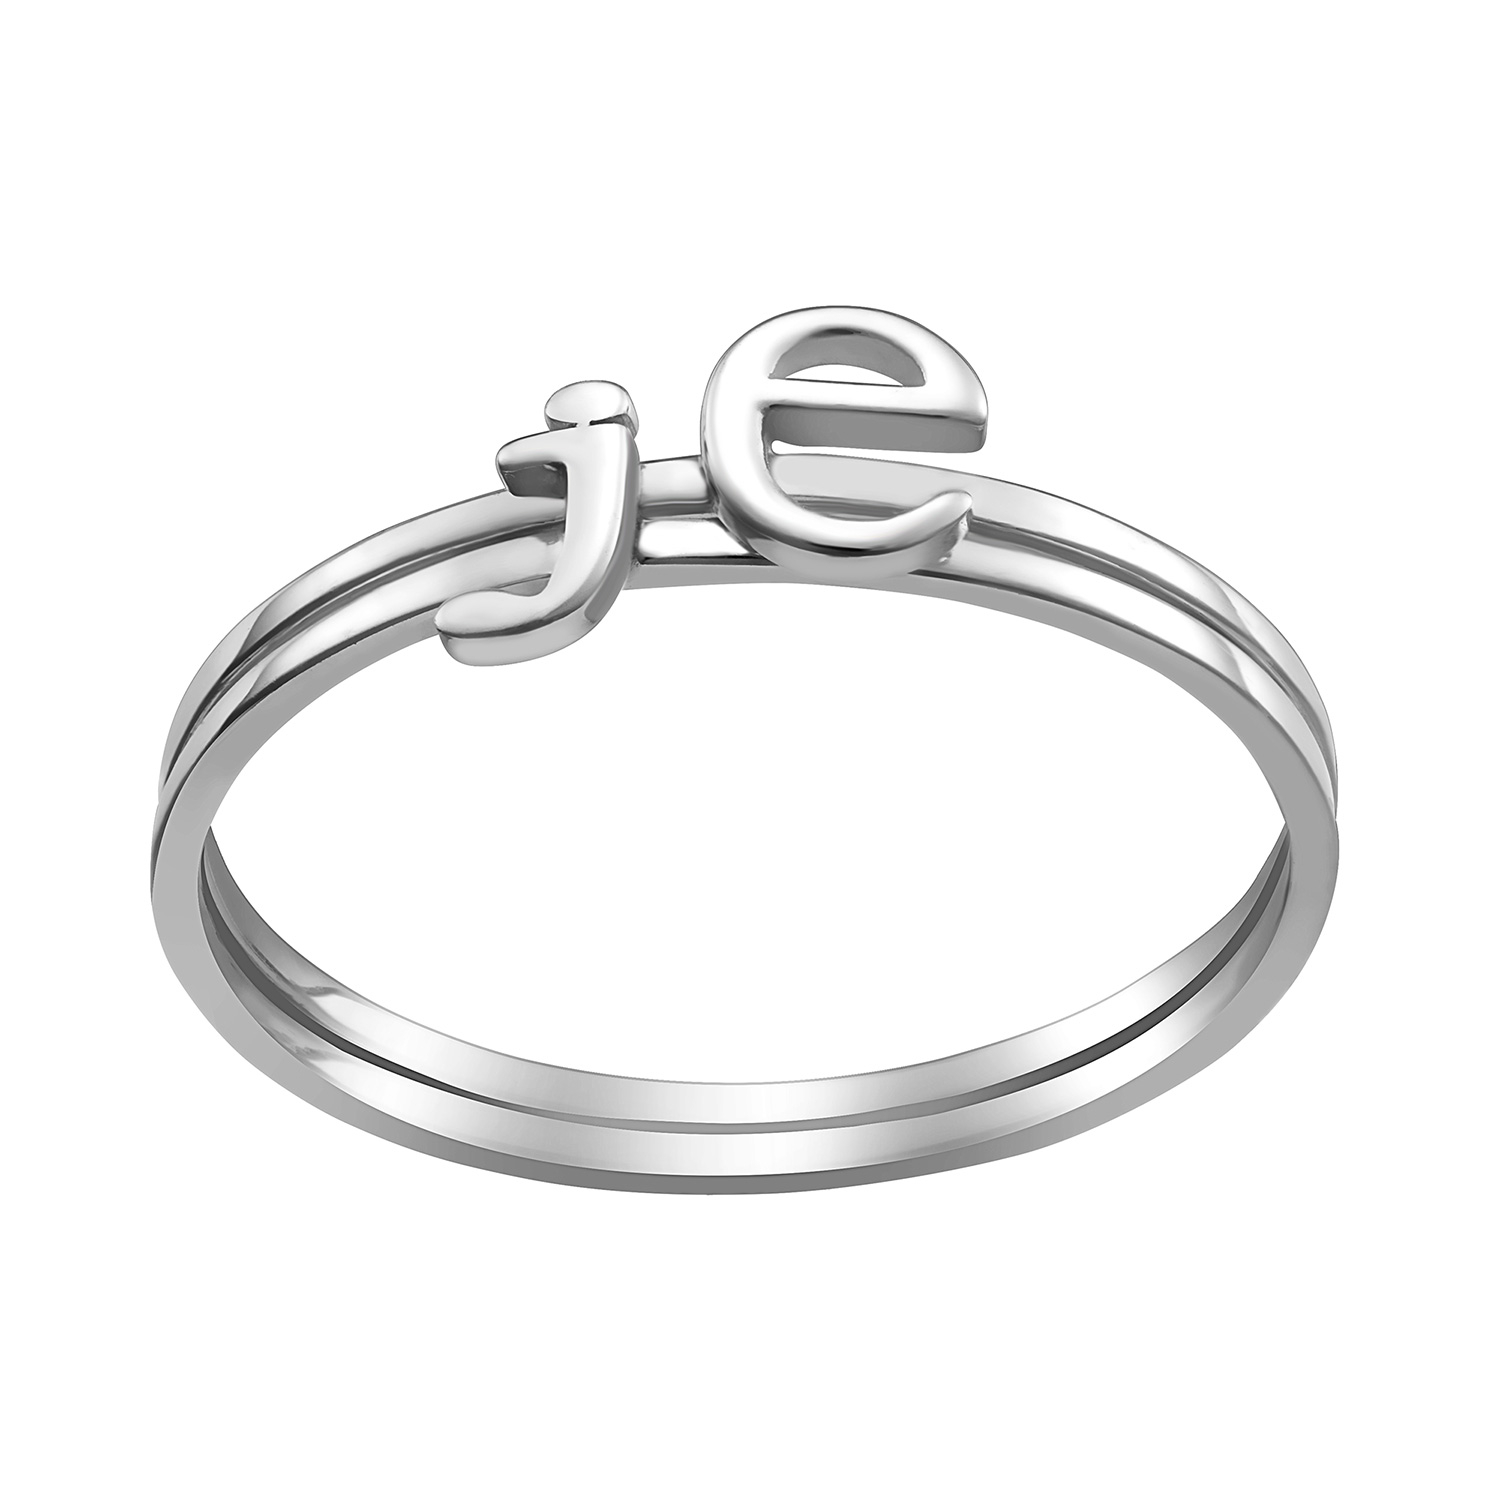 Sterling Silver Petite Lowercase Initials Ring - Set of 2